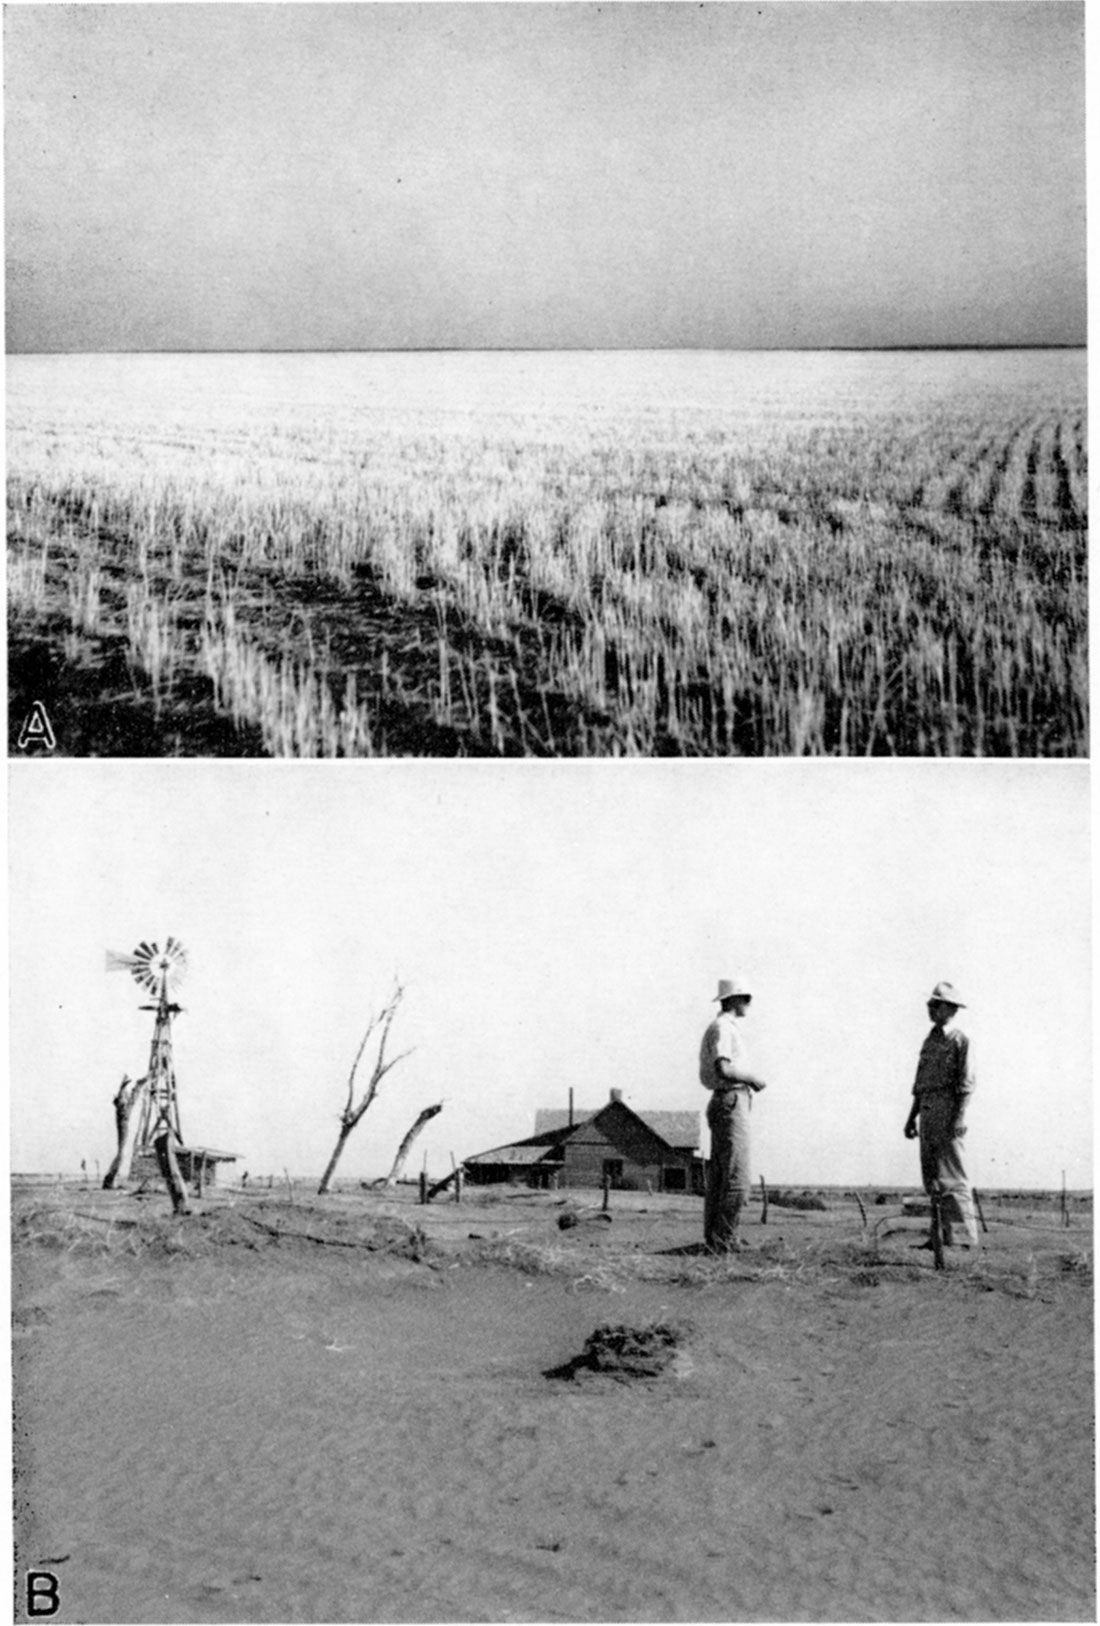 Two black and white photos; top is flat, featureless topography typical of the upland plains of Stanton county; bottom is abandoned farm in Morton county, Kansas.